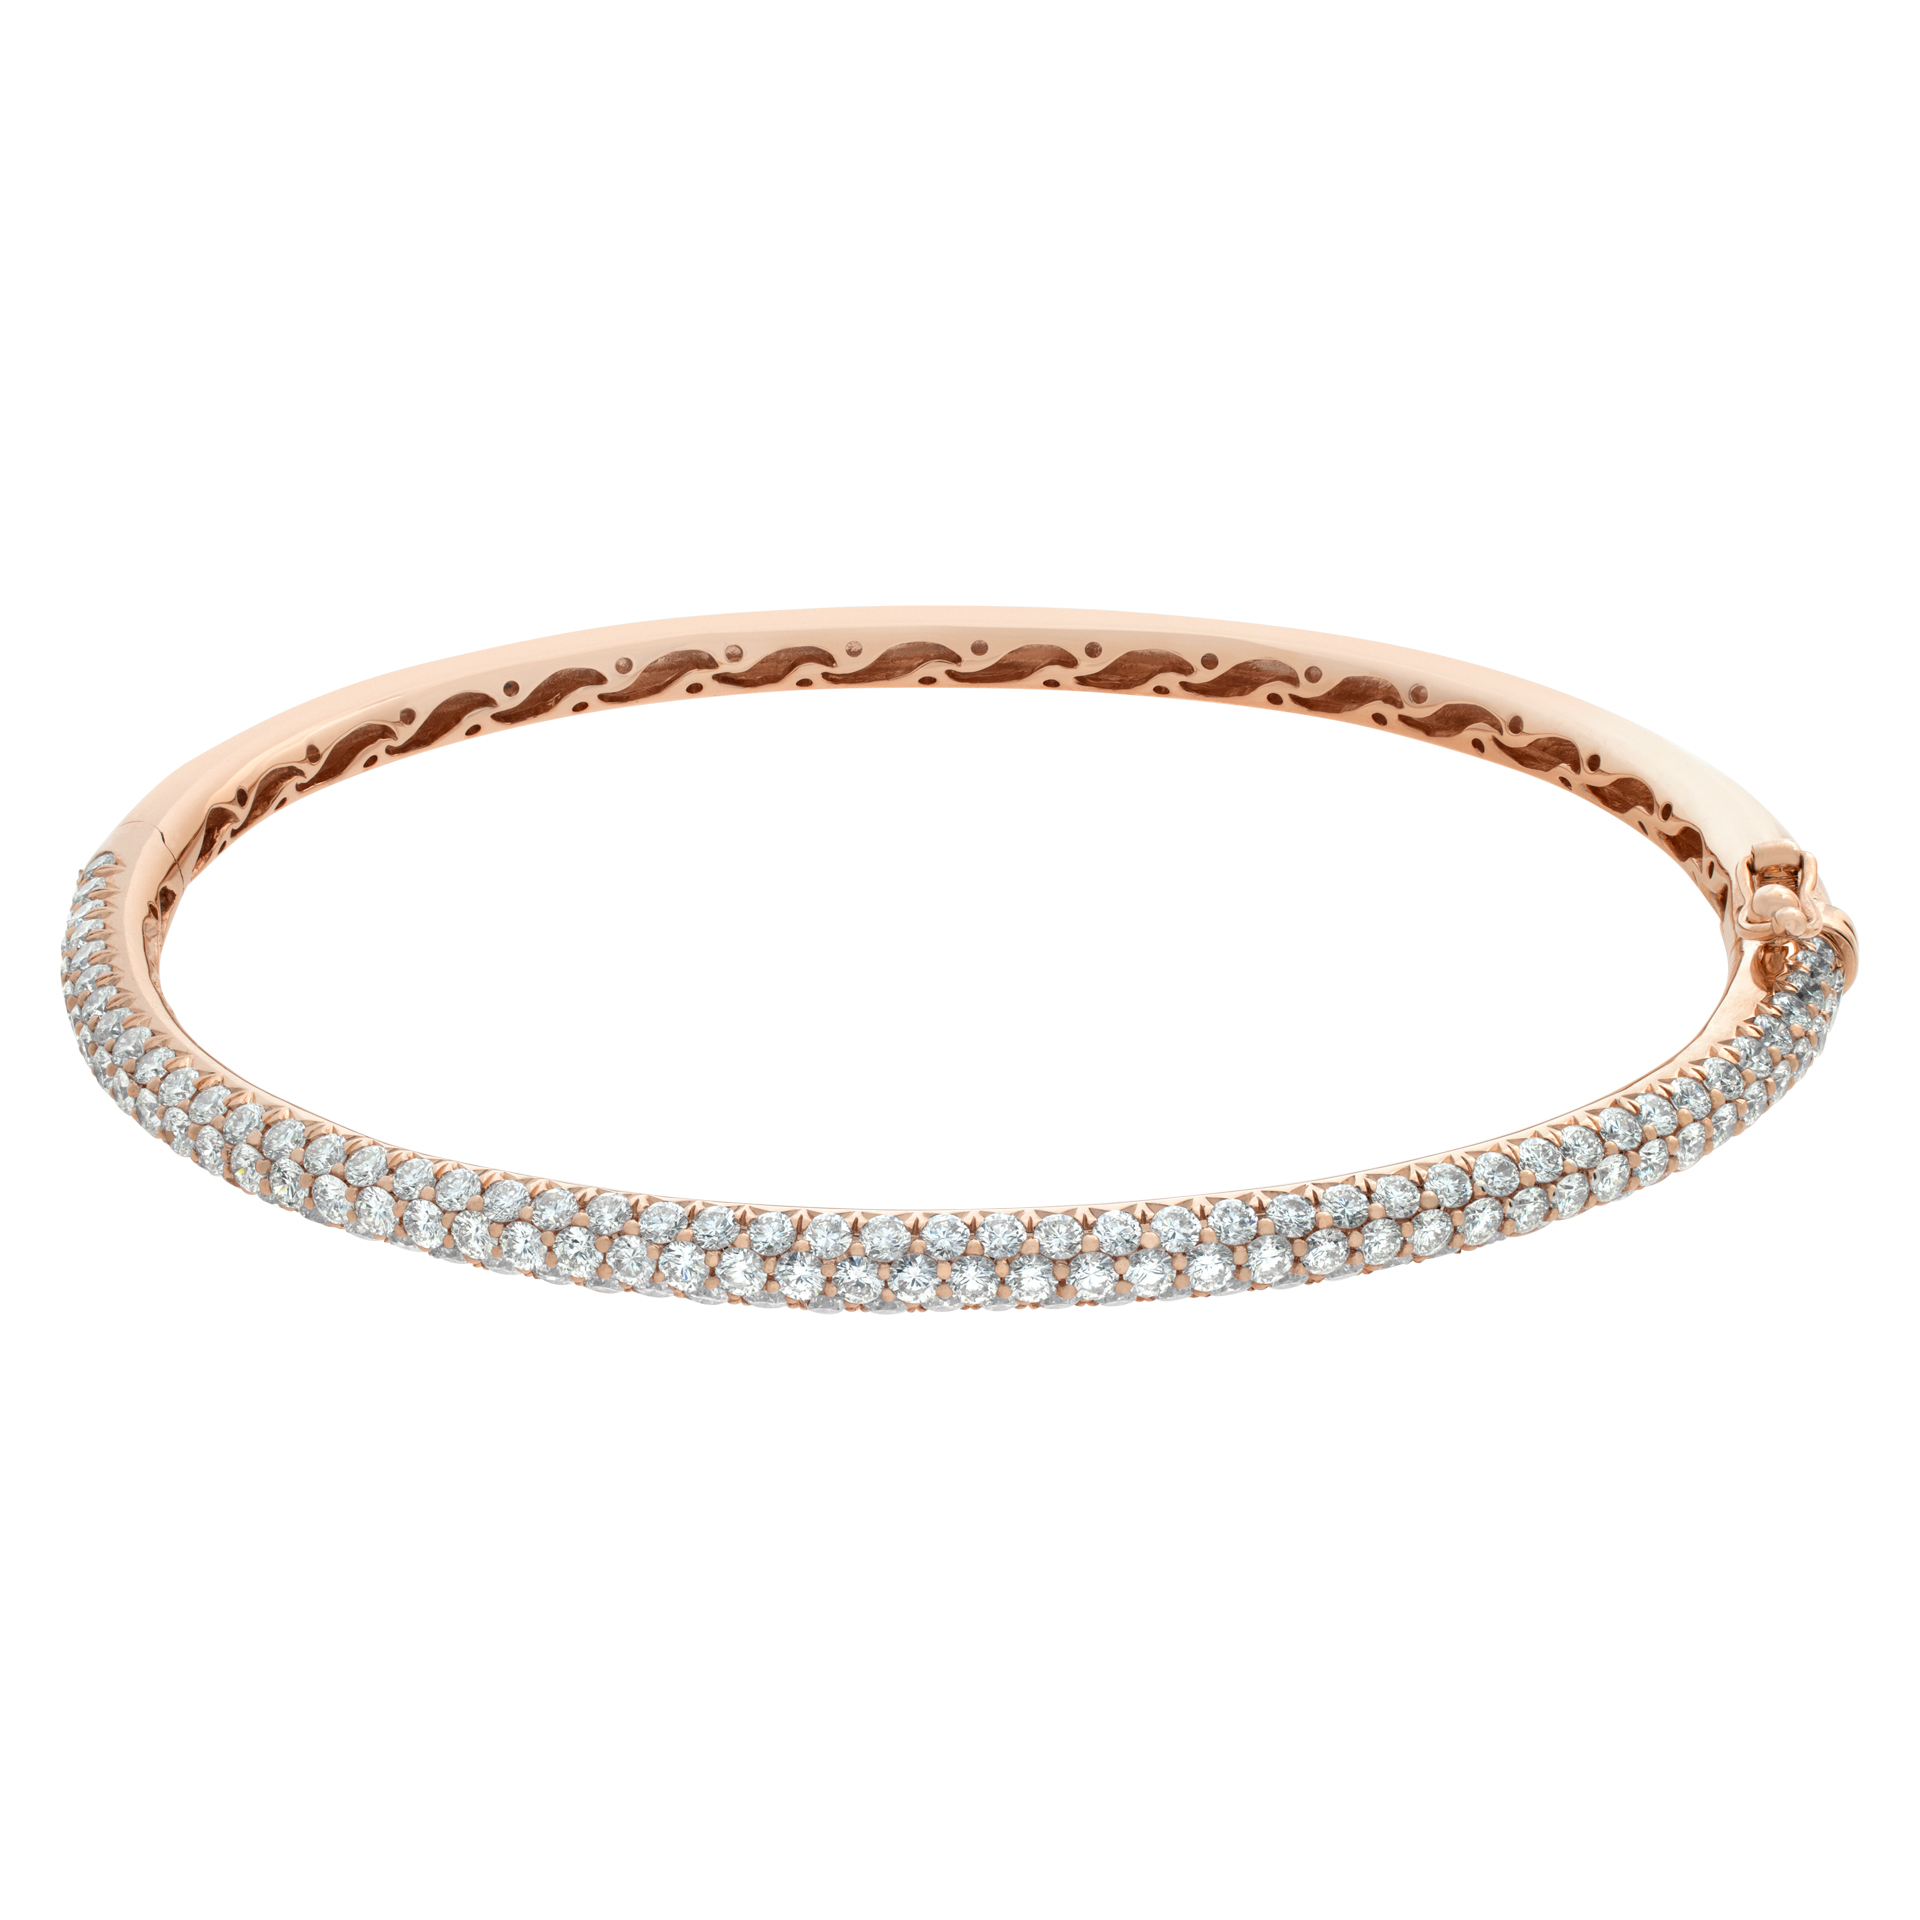 18k rose gold bangle with 2.86 carats in round brilliant cut pave diamons